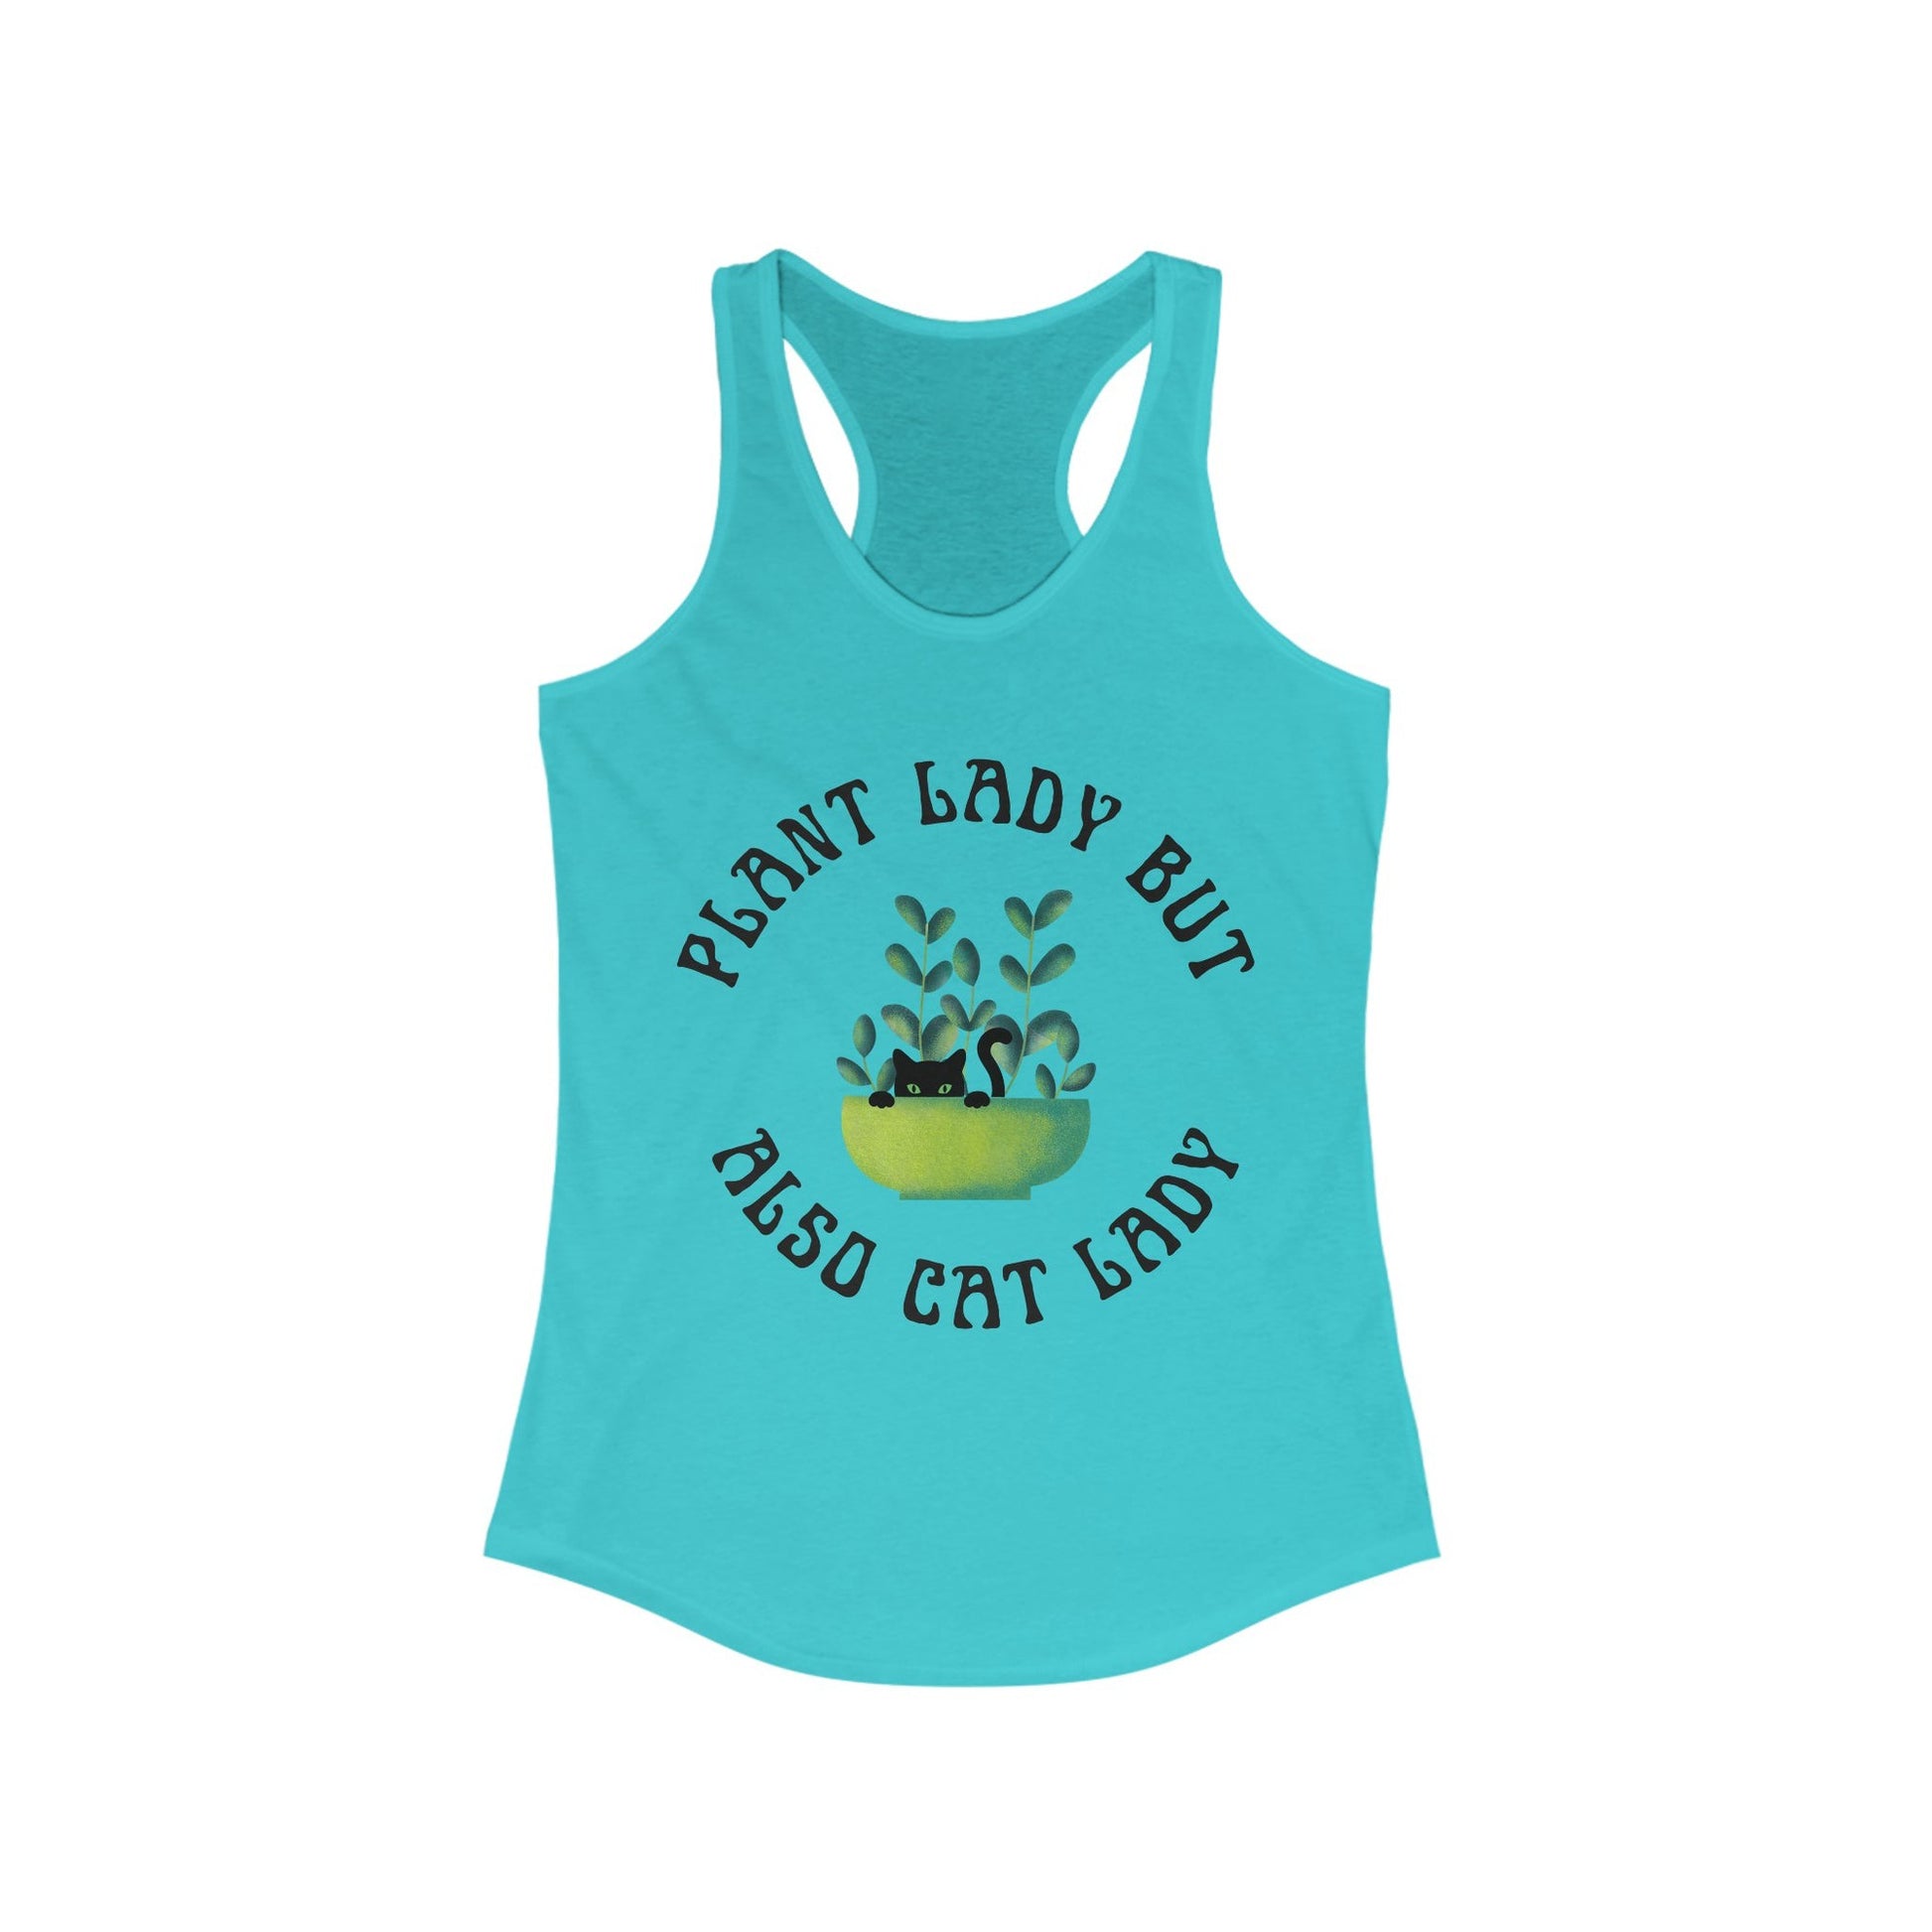 Plant Lady But Also Cat Lady Women's Ideal Racerback Tank